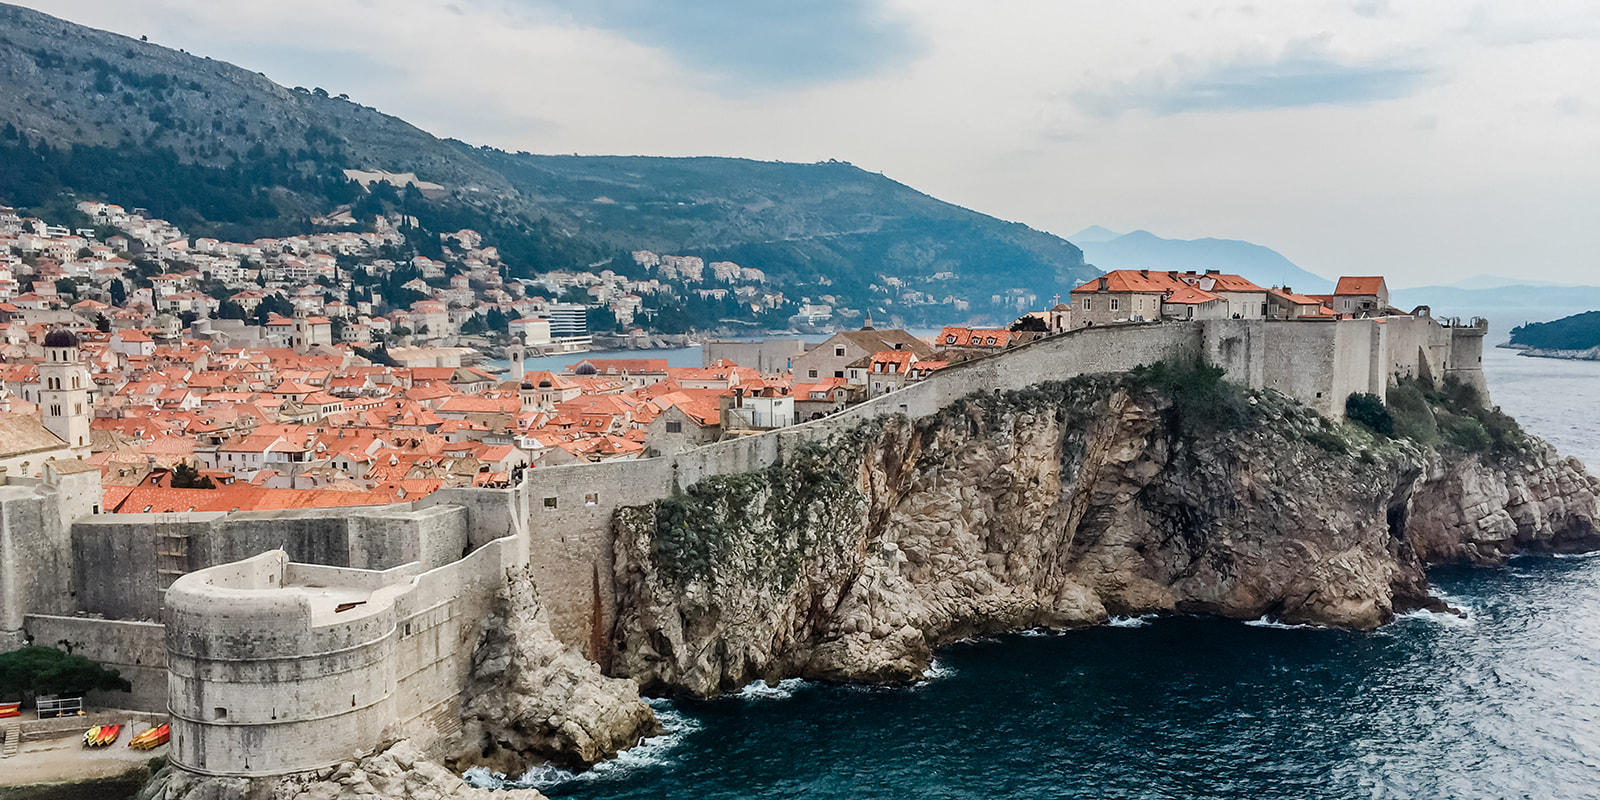 Adventure Wedding Photography can happen anywhere, including Croatia! This picture if of a Croatian cliff side city. You can see the ocean, the mountains, and the warm orange roofs of the buildings.